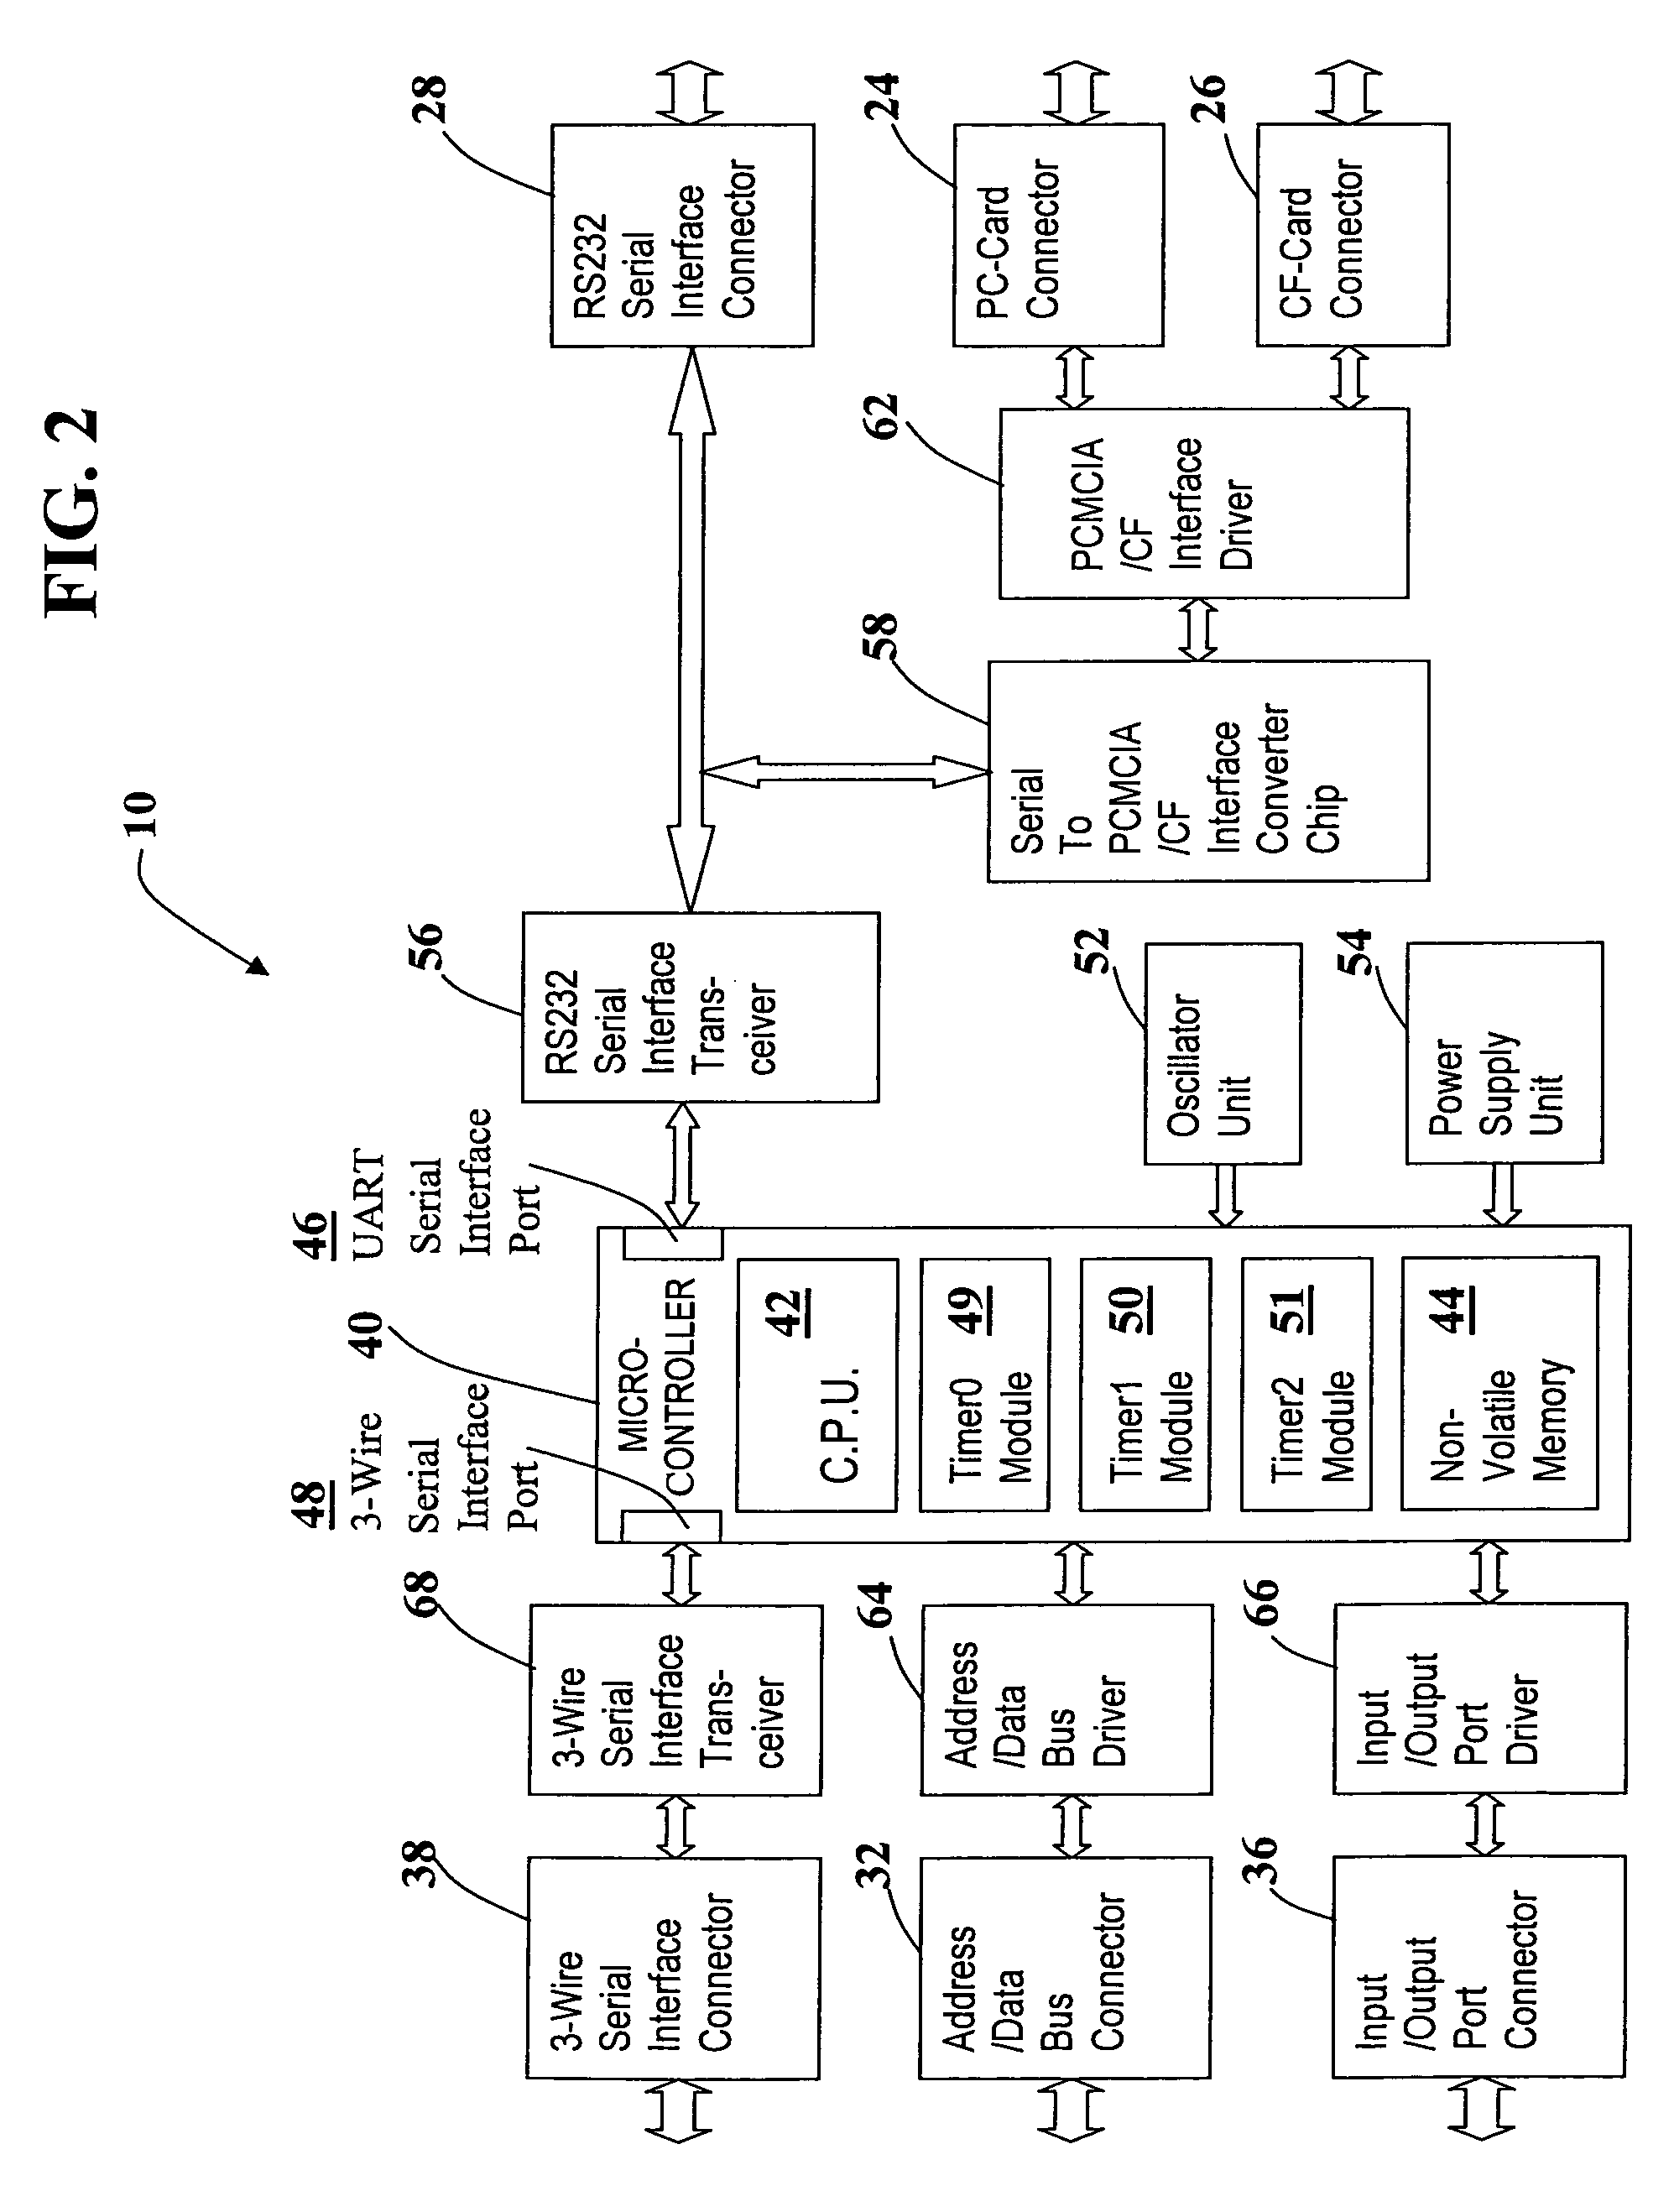 Dedicated device for automatically accessing wireless internet network and supplying wireless packet data-based indoor-capable GPS locations